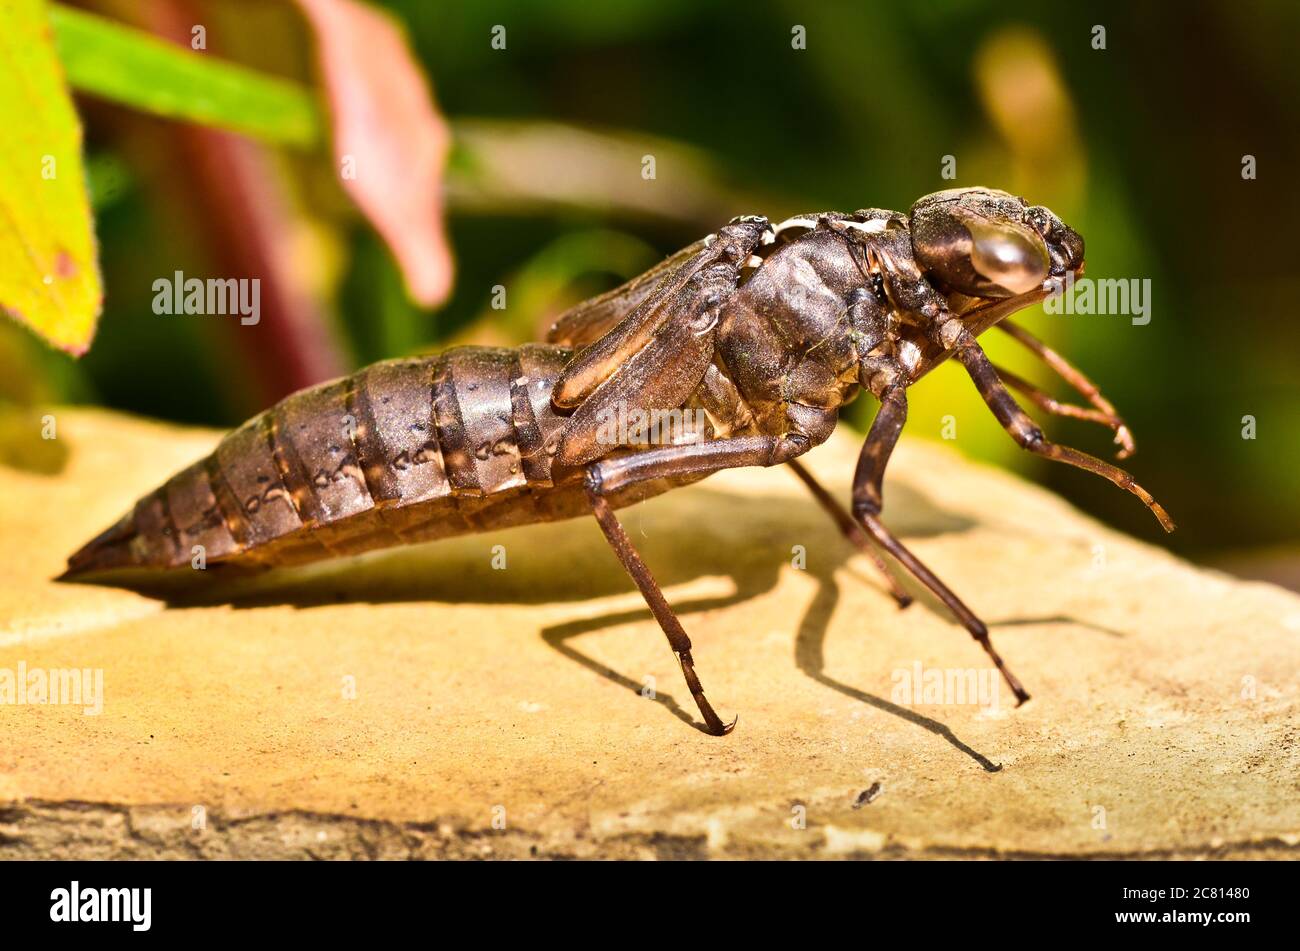 A larva, an empty nymph, of a dragon fly, a bubble tube, looking like a monster Stock Photo